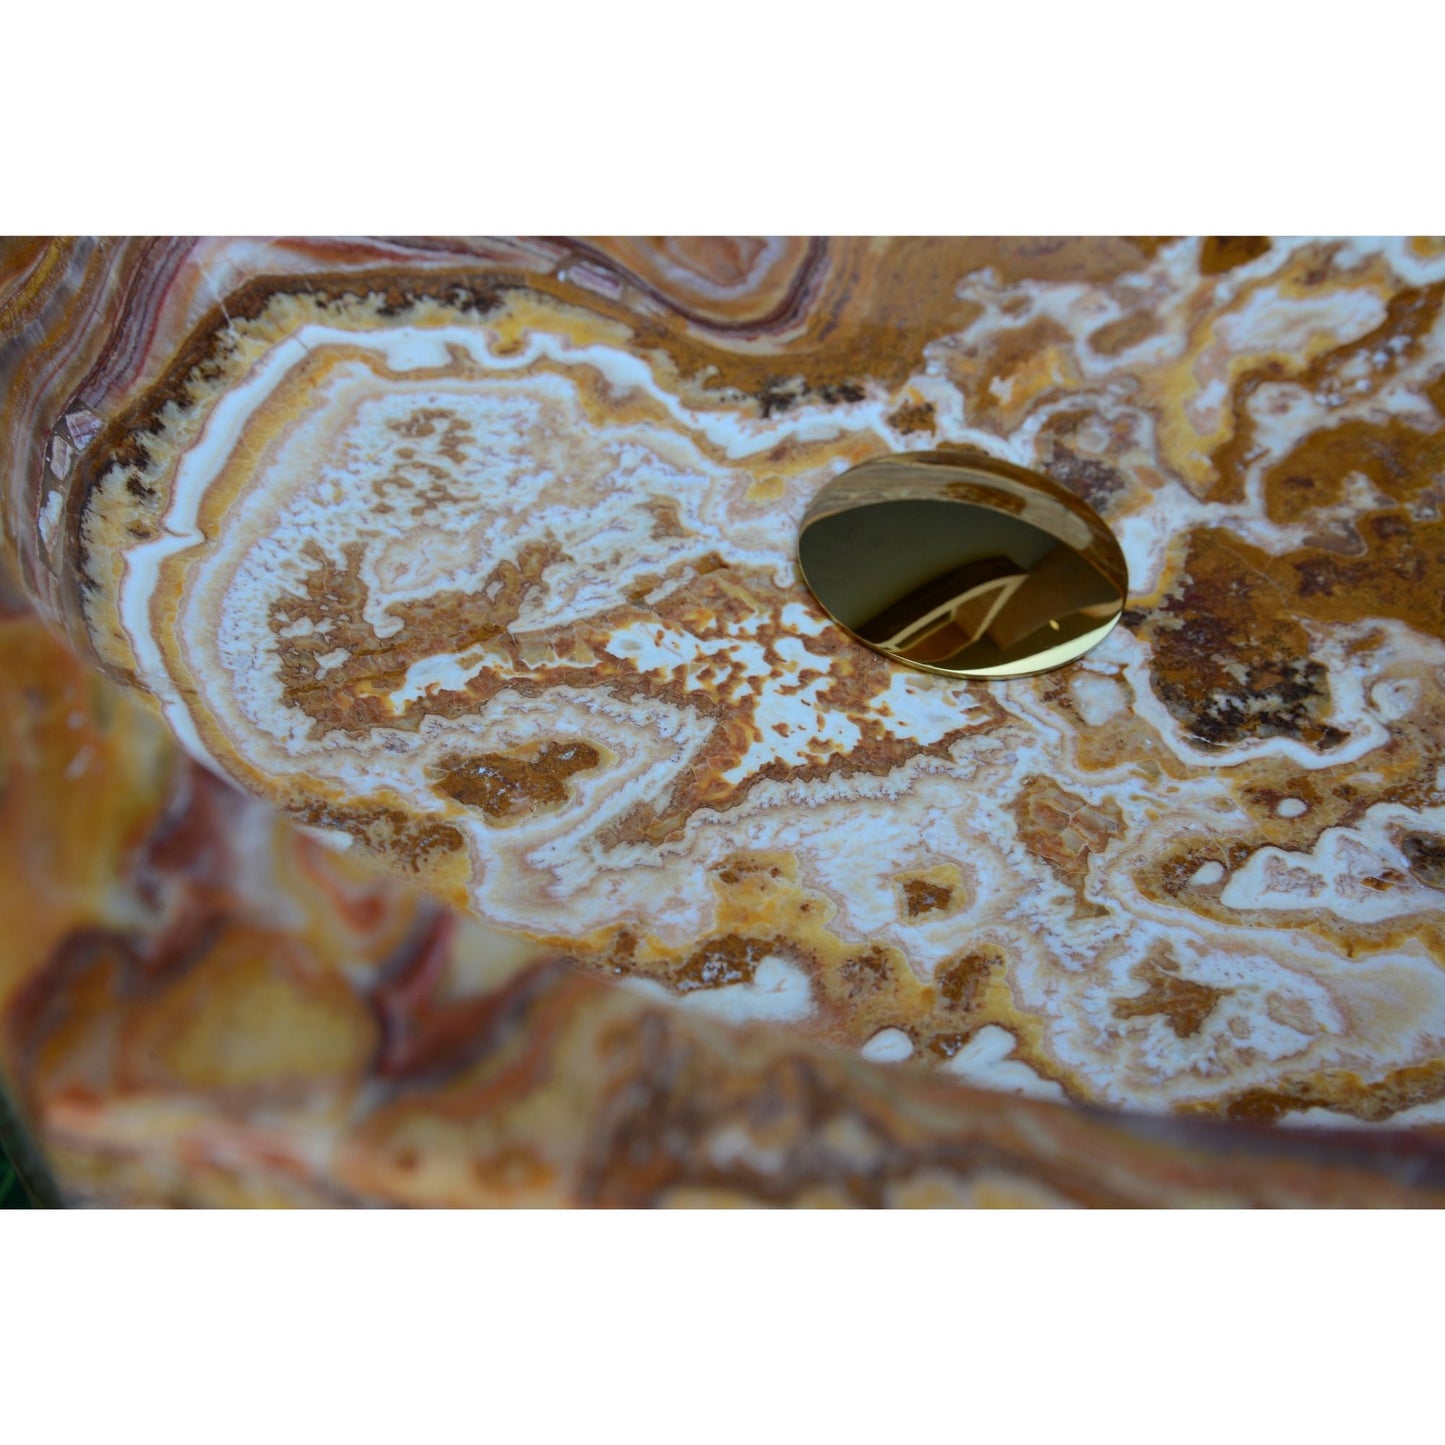 HANDCRAFTED ONYX MARBLE OCTAGON SINK